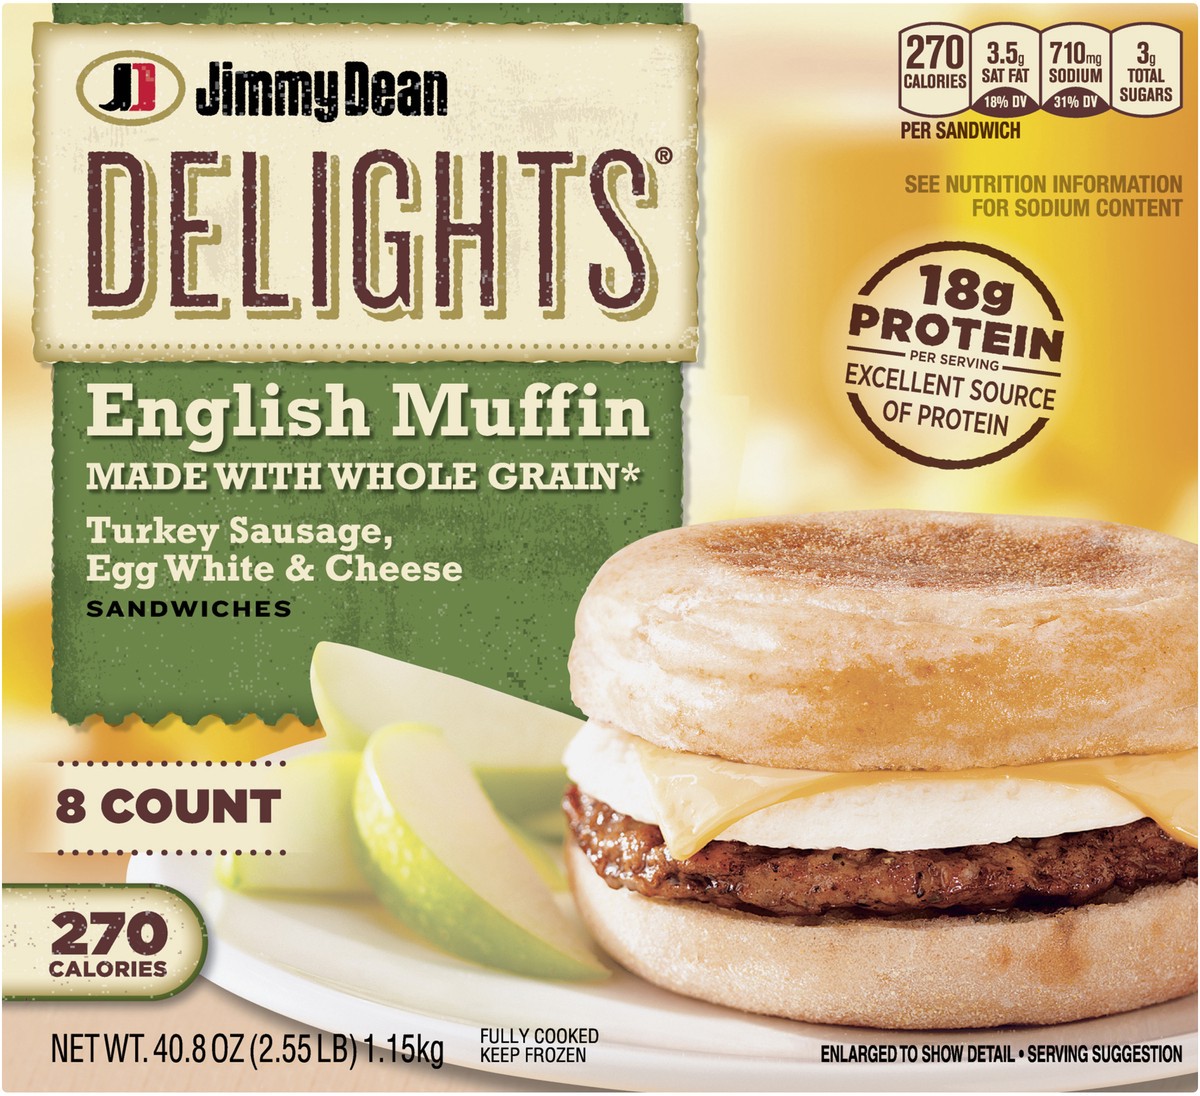 slide 6 of 9, Jimmy Dean Delights English Muffin Breakfast Sandwiches with Turkey Sausage, Egg White, and Cheese, Frozen, 8 Count, 1.16 kg